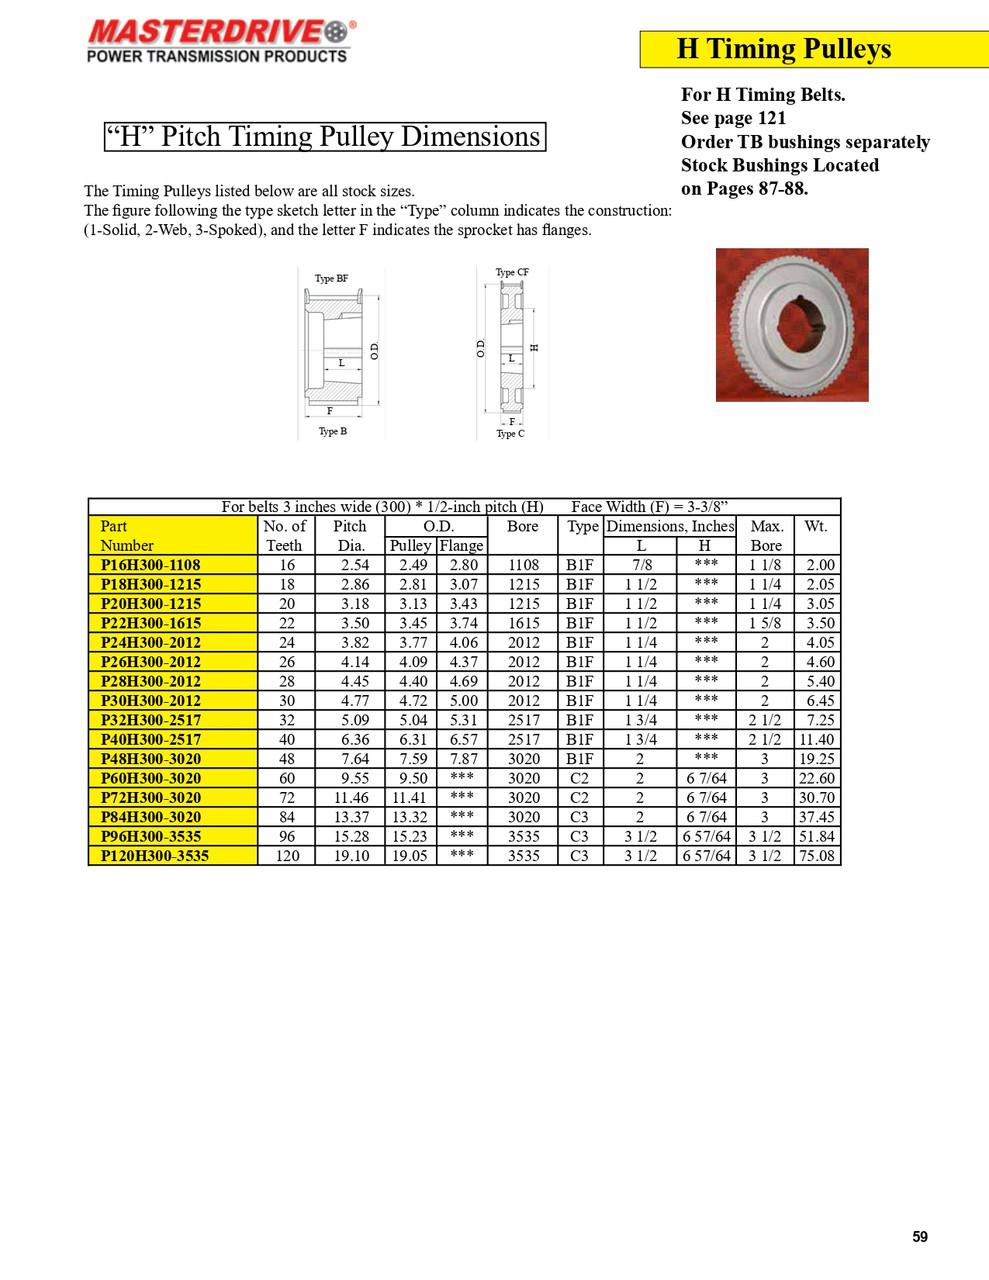 72 Tooth "H" Pitch "TB" Timing Pulley  P72H300-3020